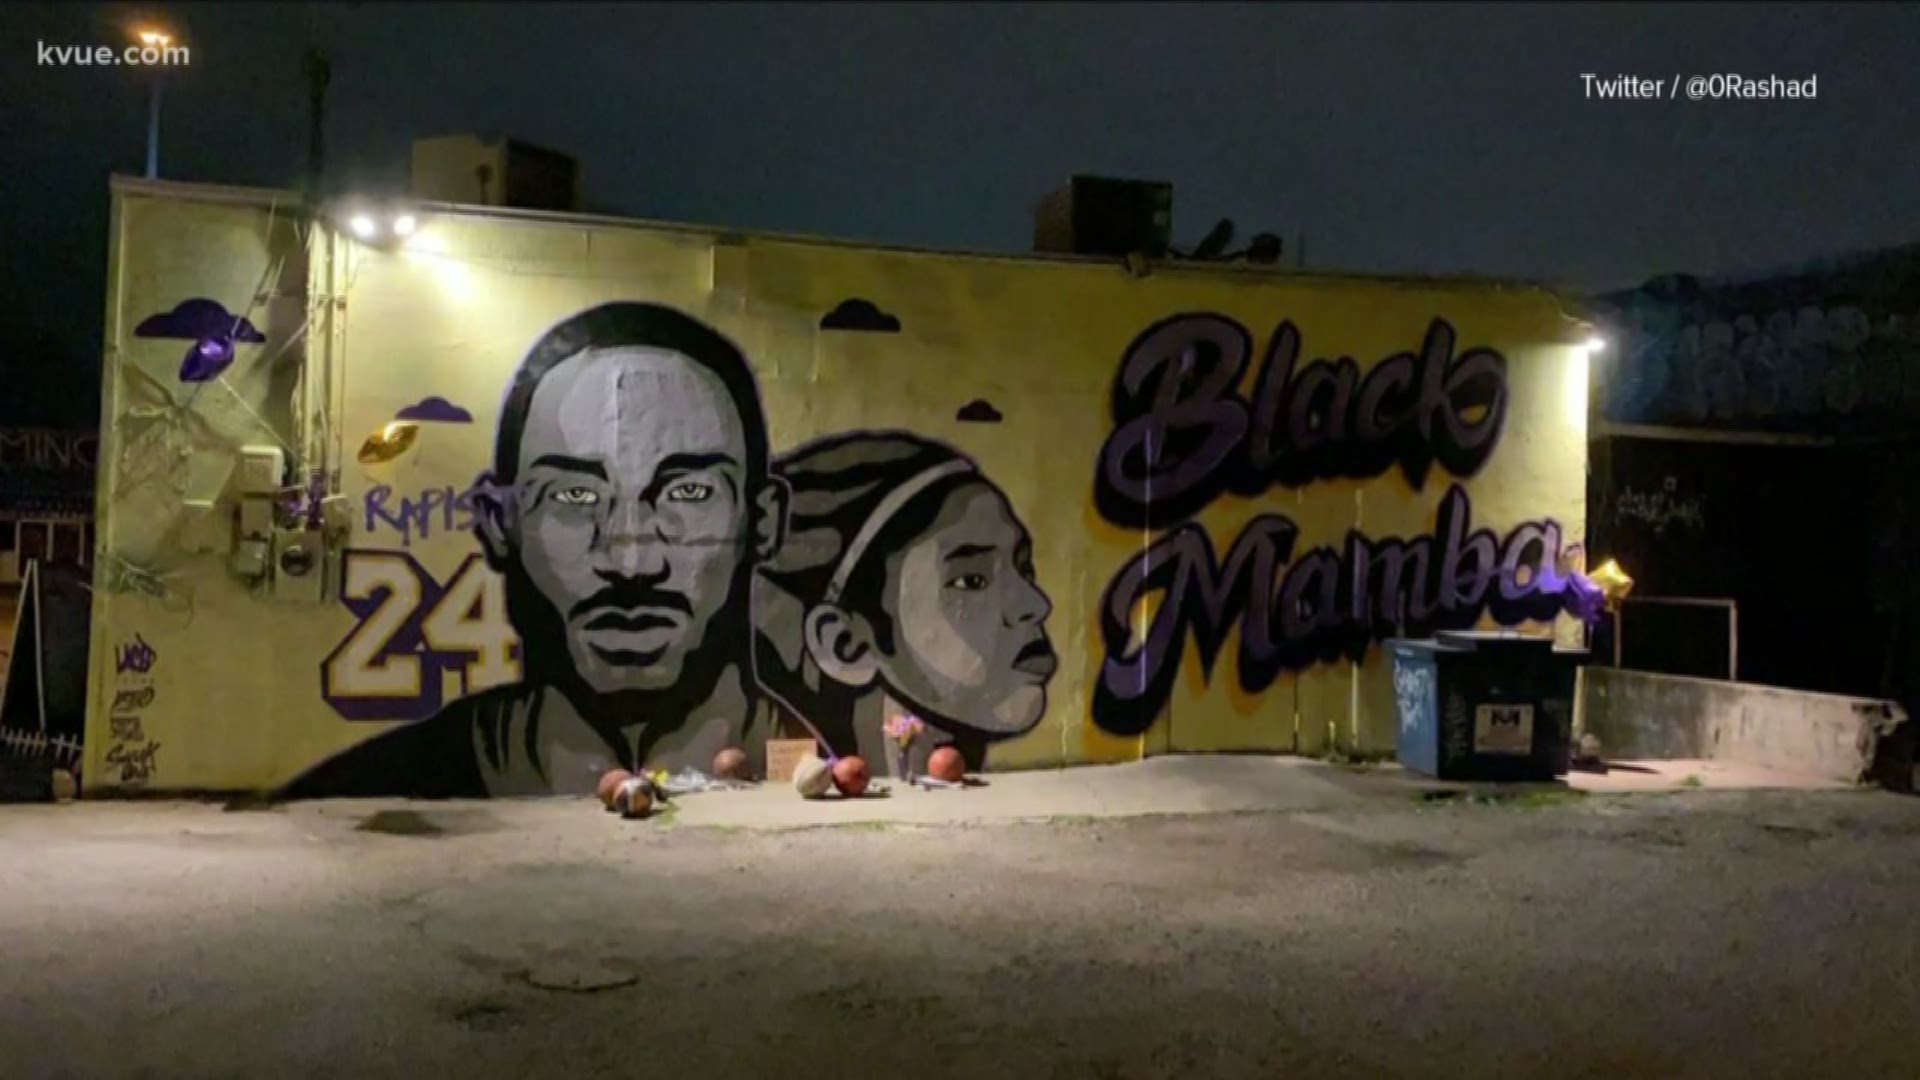 Just hours after its unveiling, an Austin mural honoring Kobe Bryant and his daughter, Gianna, was defaced.